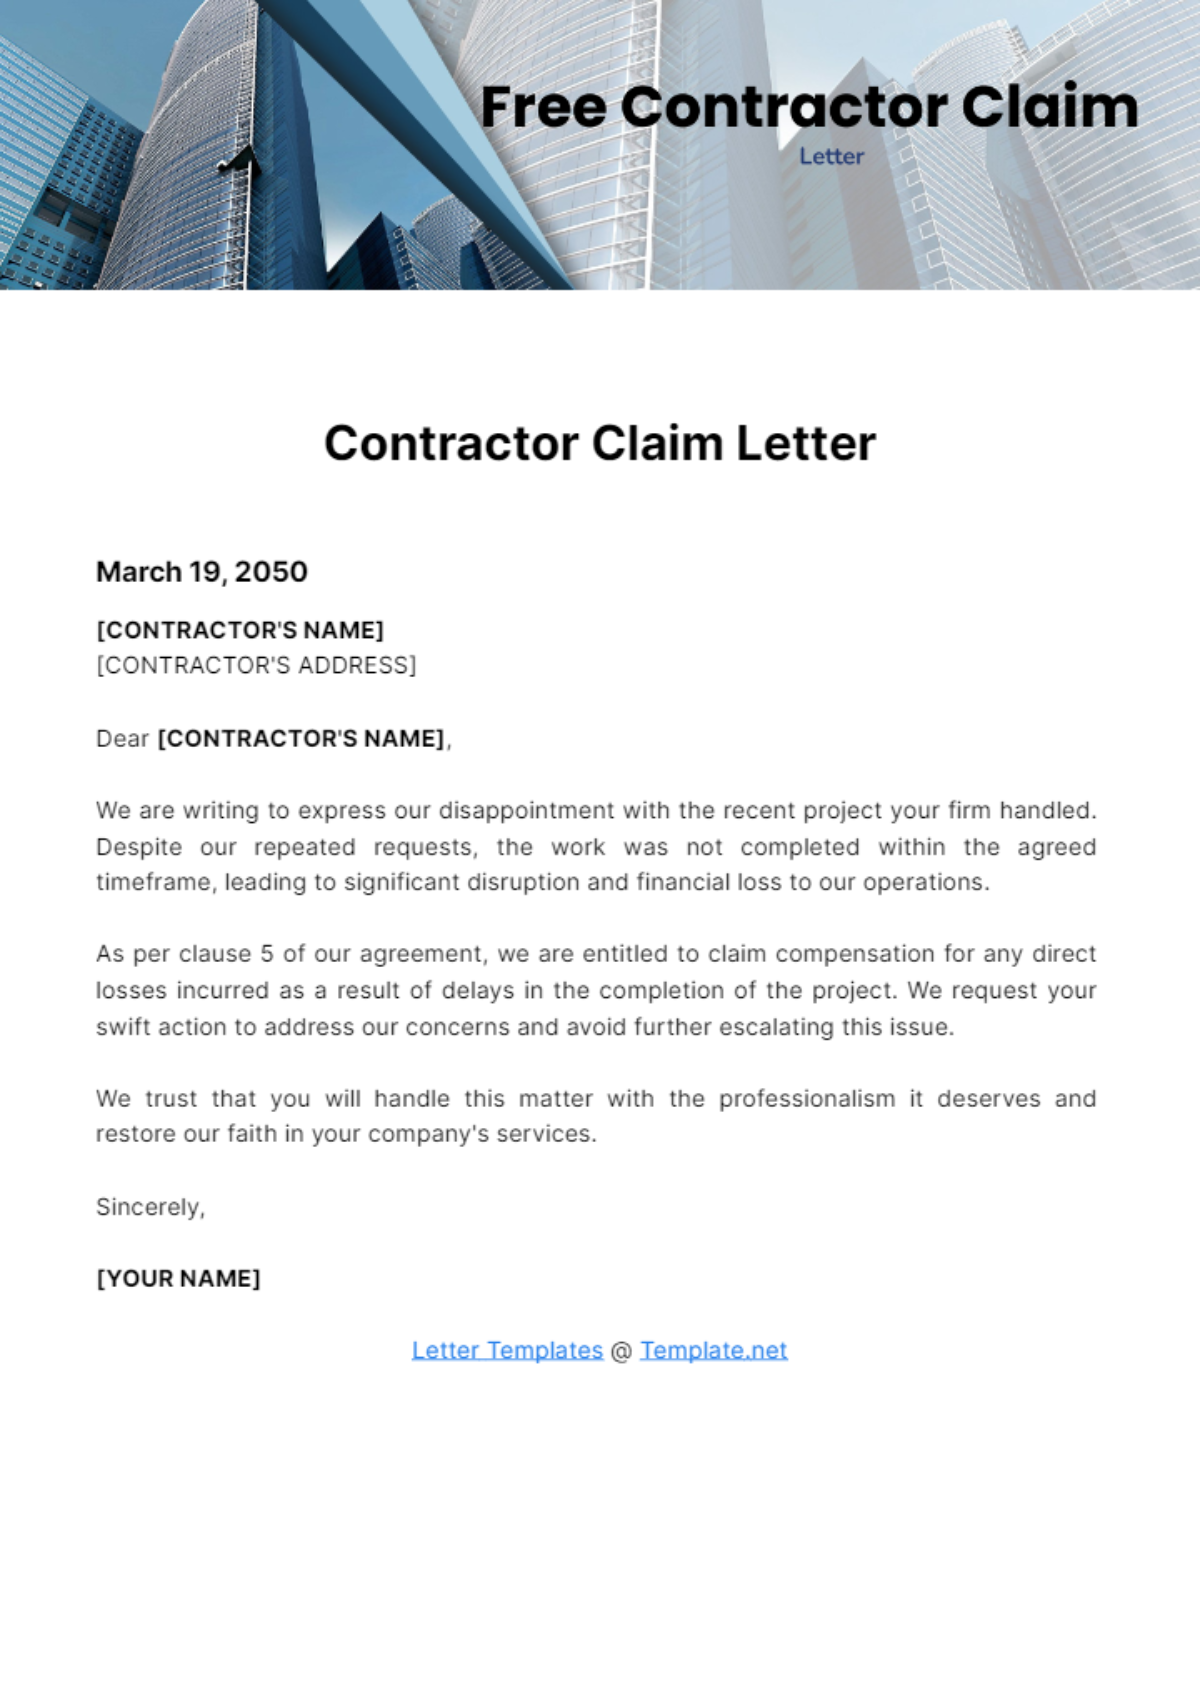 Free Contractor Claim Letter Template